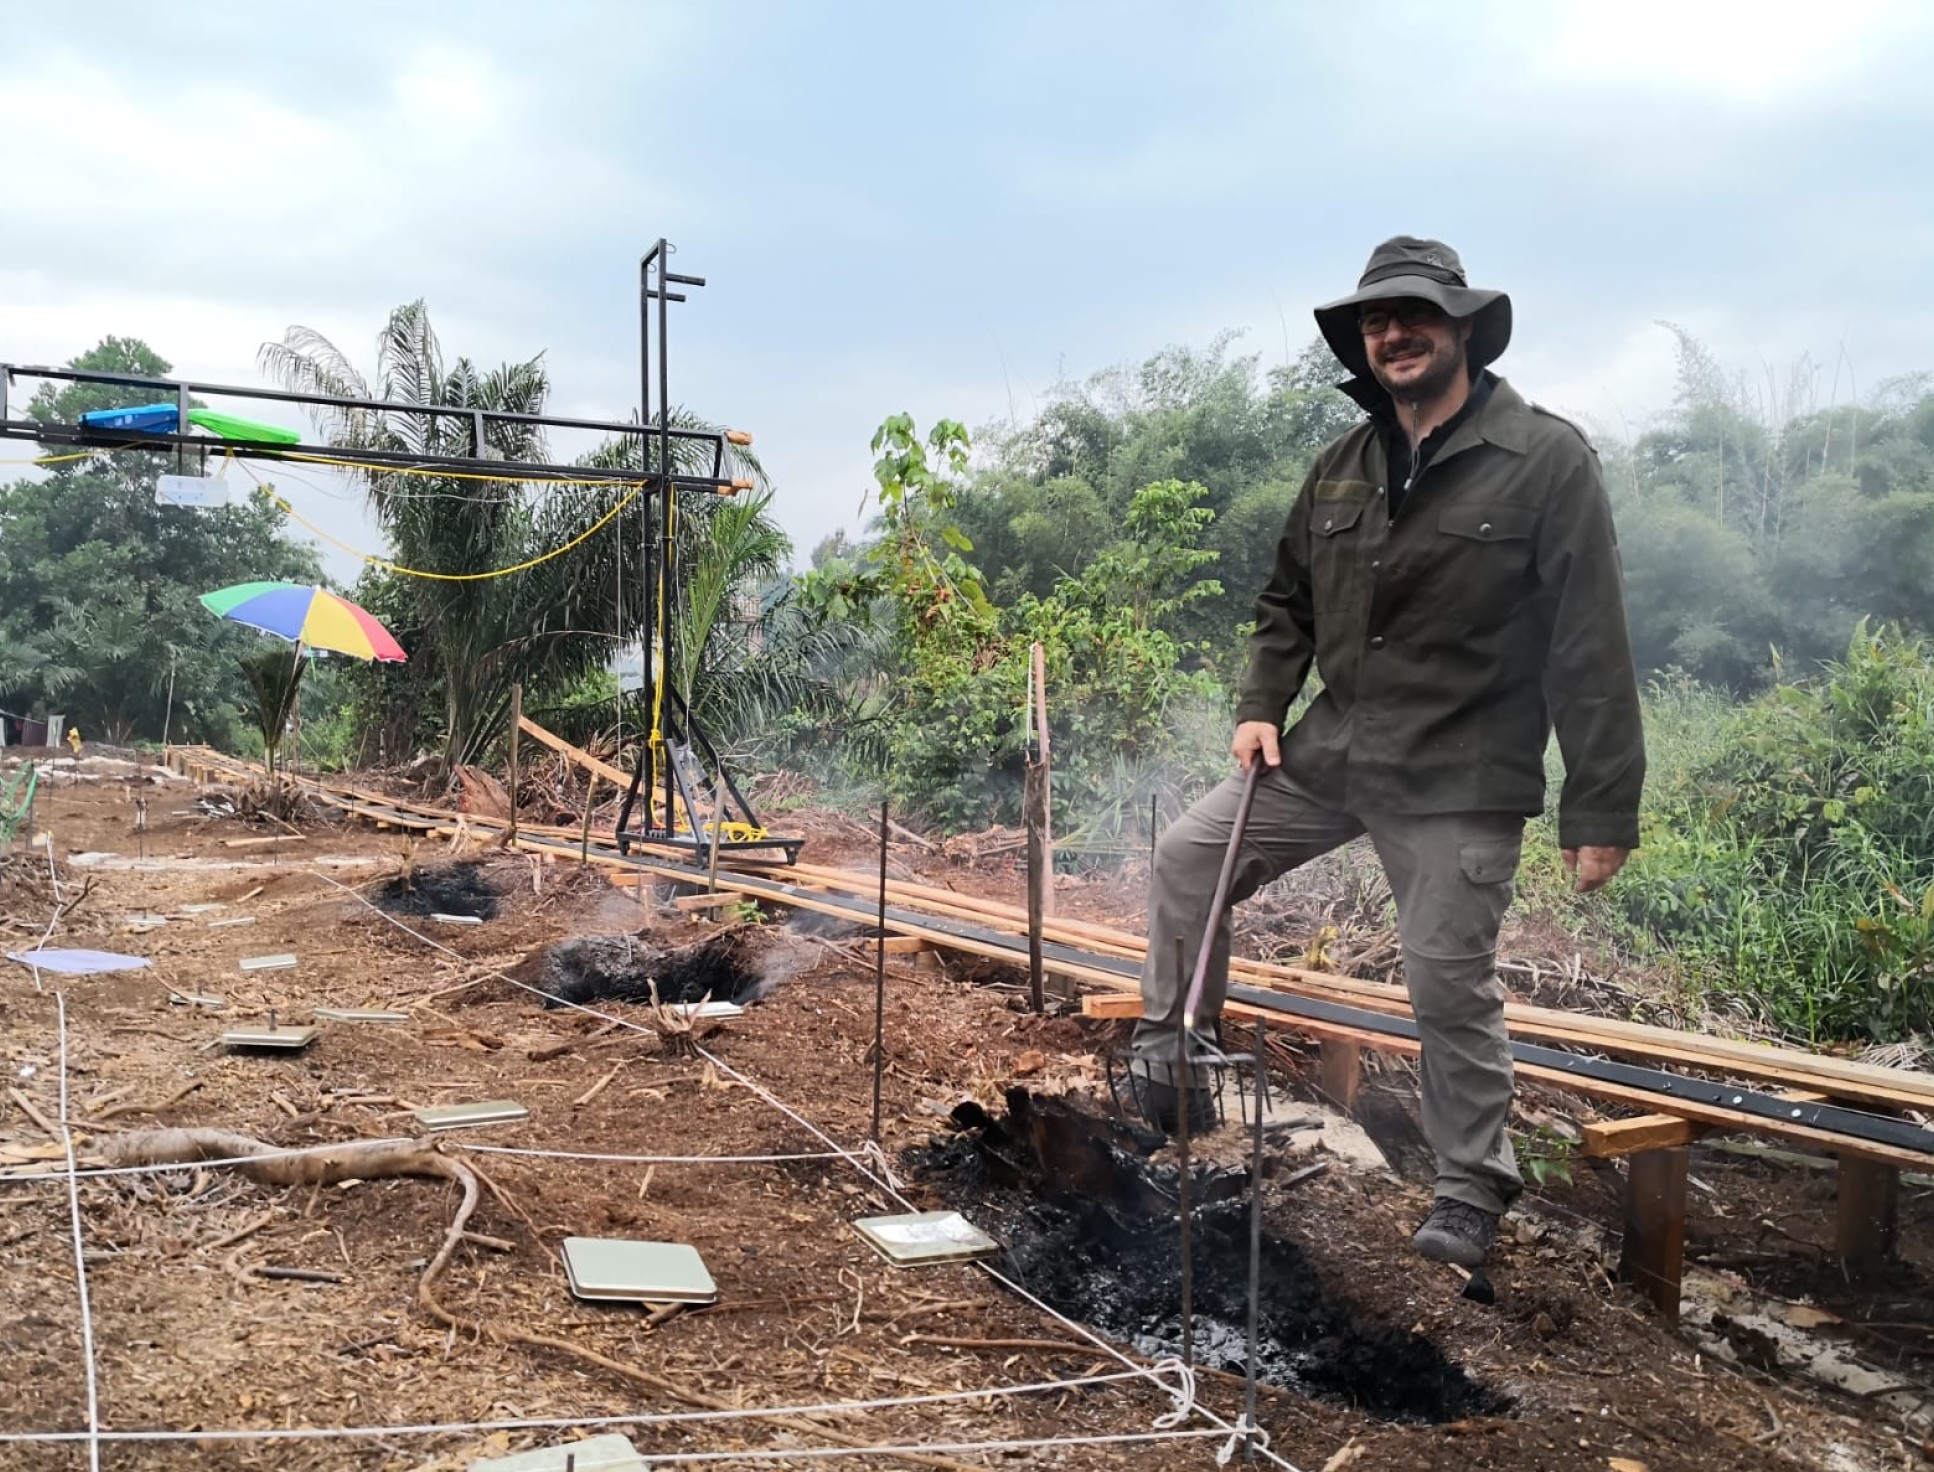 Prof. Rein conducting wildfire experiments in the peatlands of Sumatra, Indonesia.